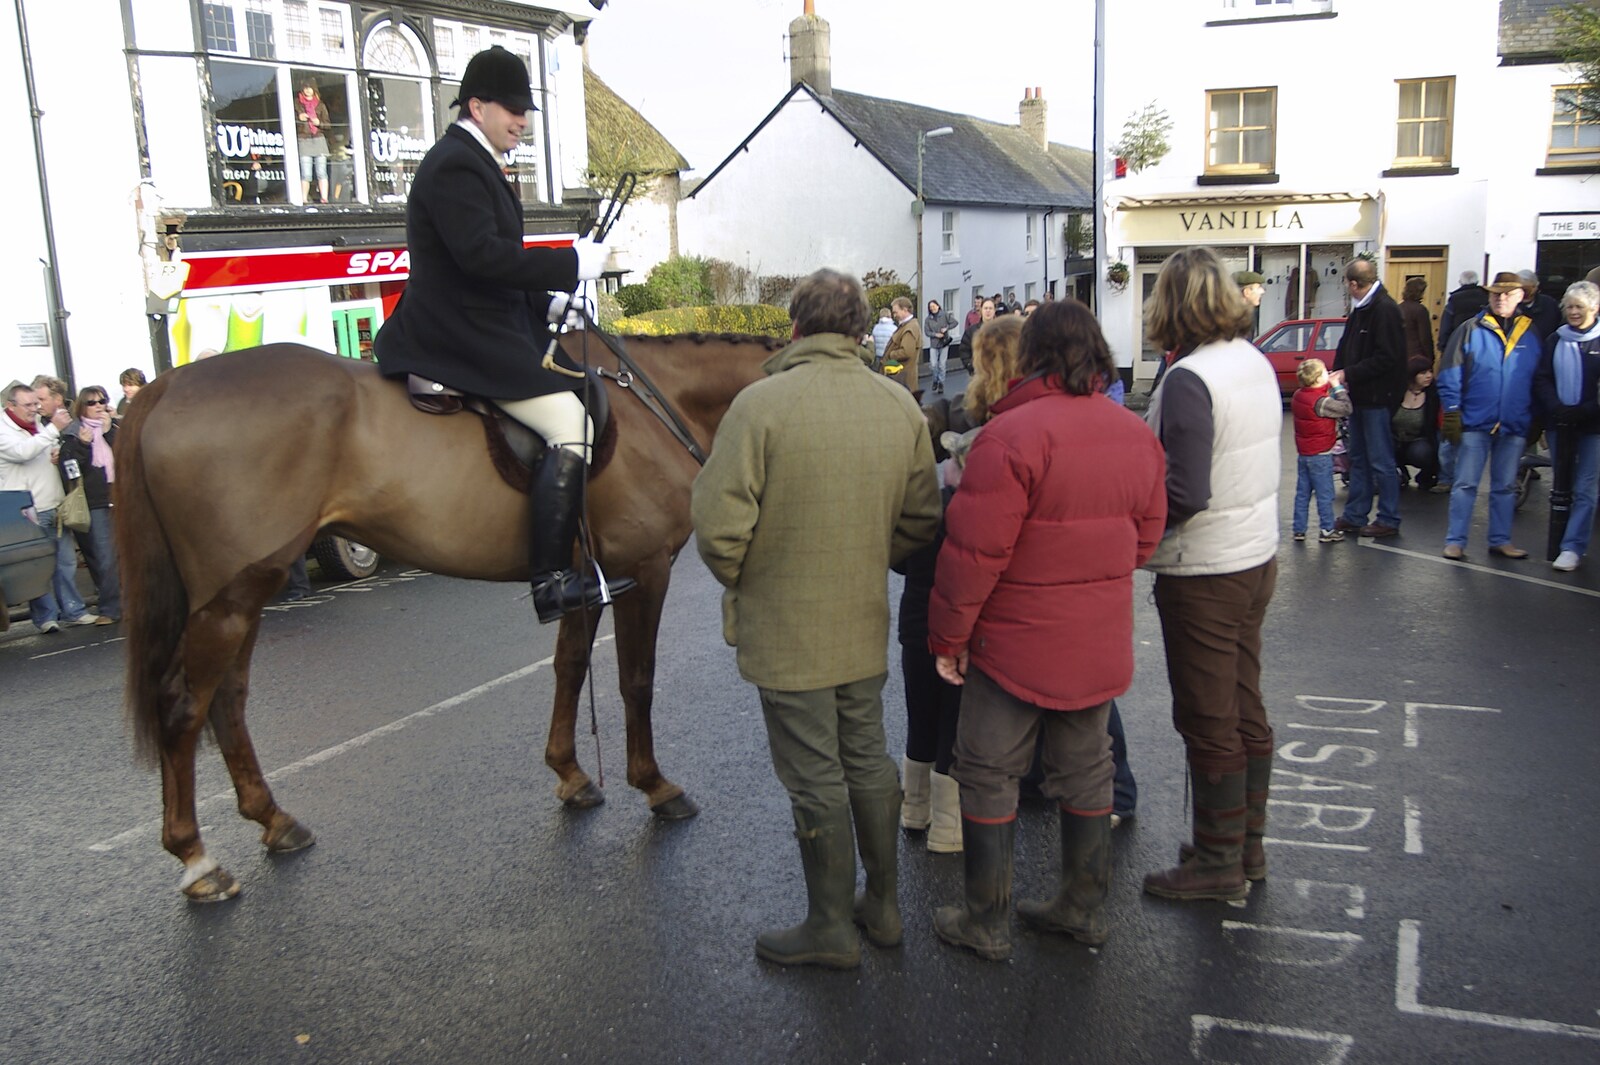 A horse on North Street from A Boxing Day Hunt, Chagford, Devon - 26th December 2007